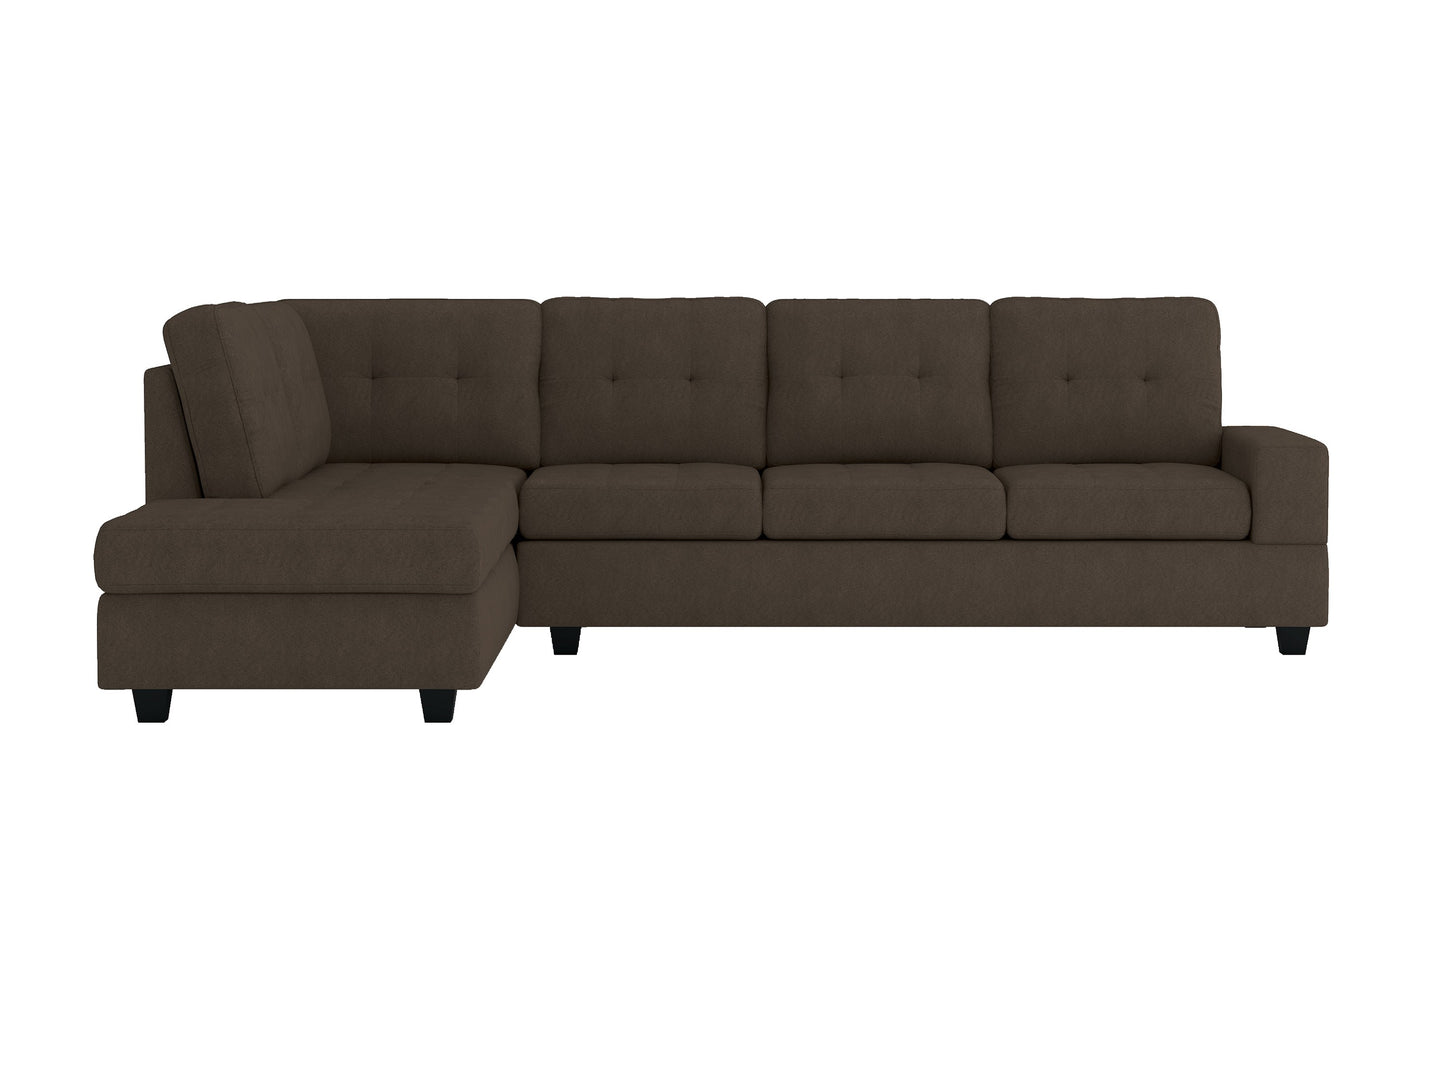 Maston Sectional Reversible Chaise Chocolate